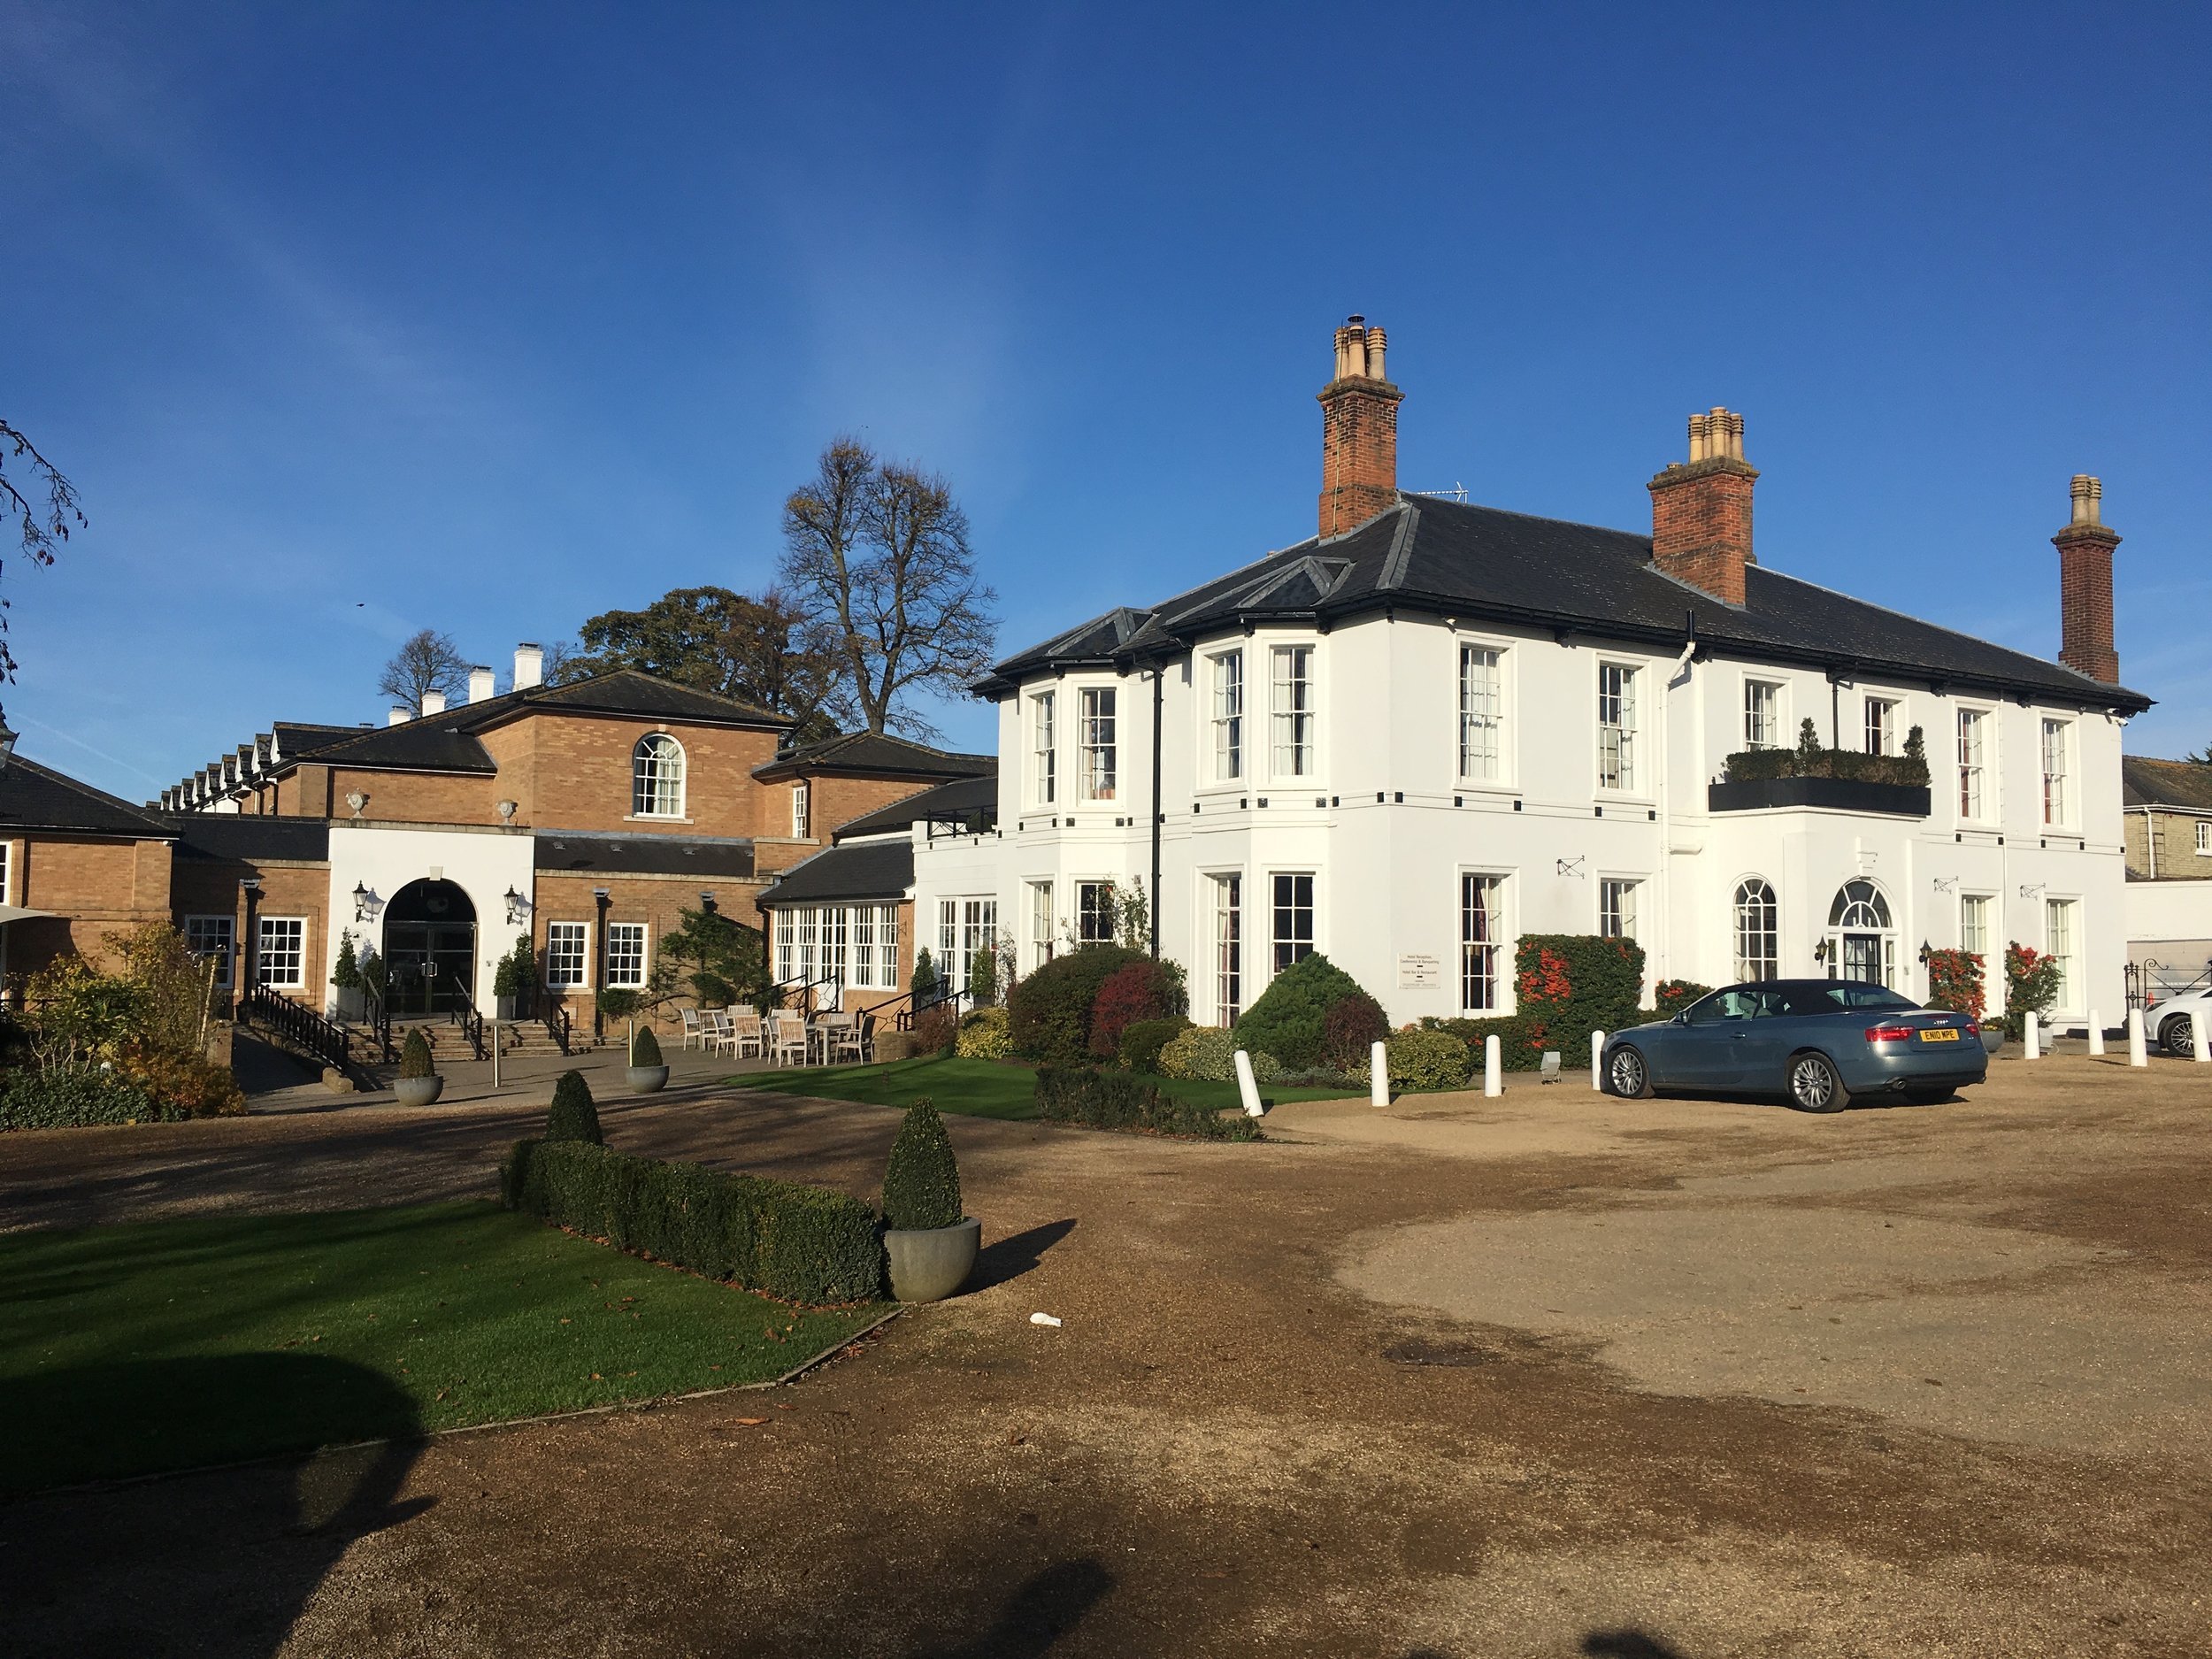  The Bedford Lodge Hotel, outside Newmarket in Suffolk  